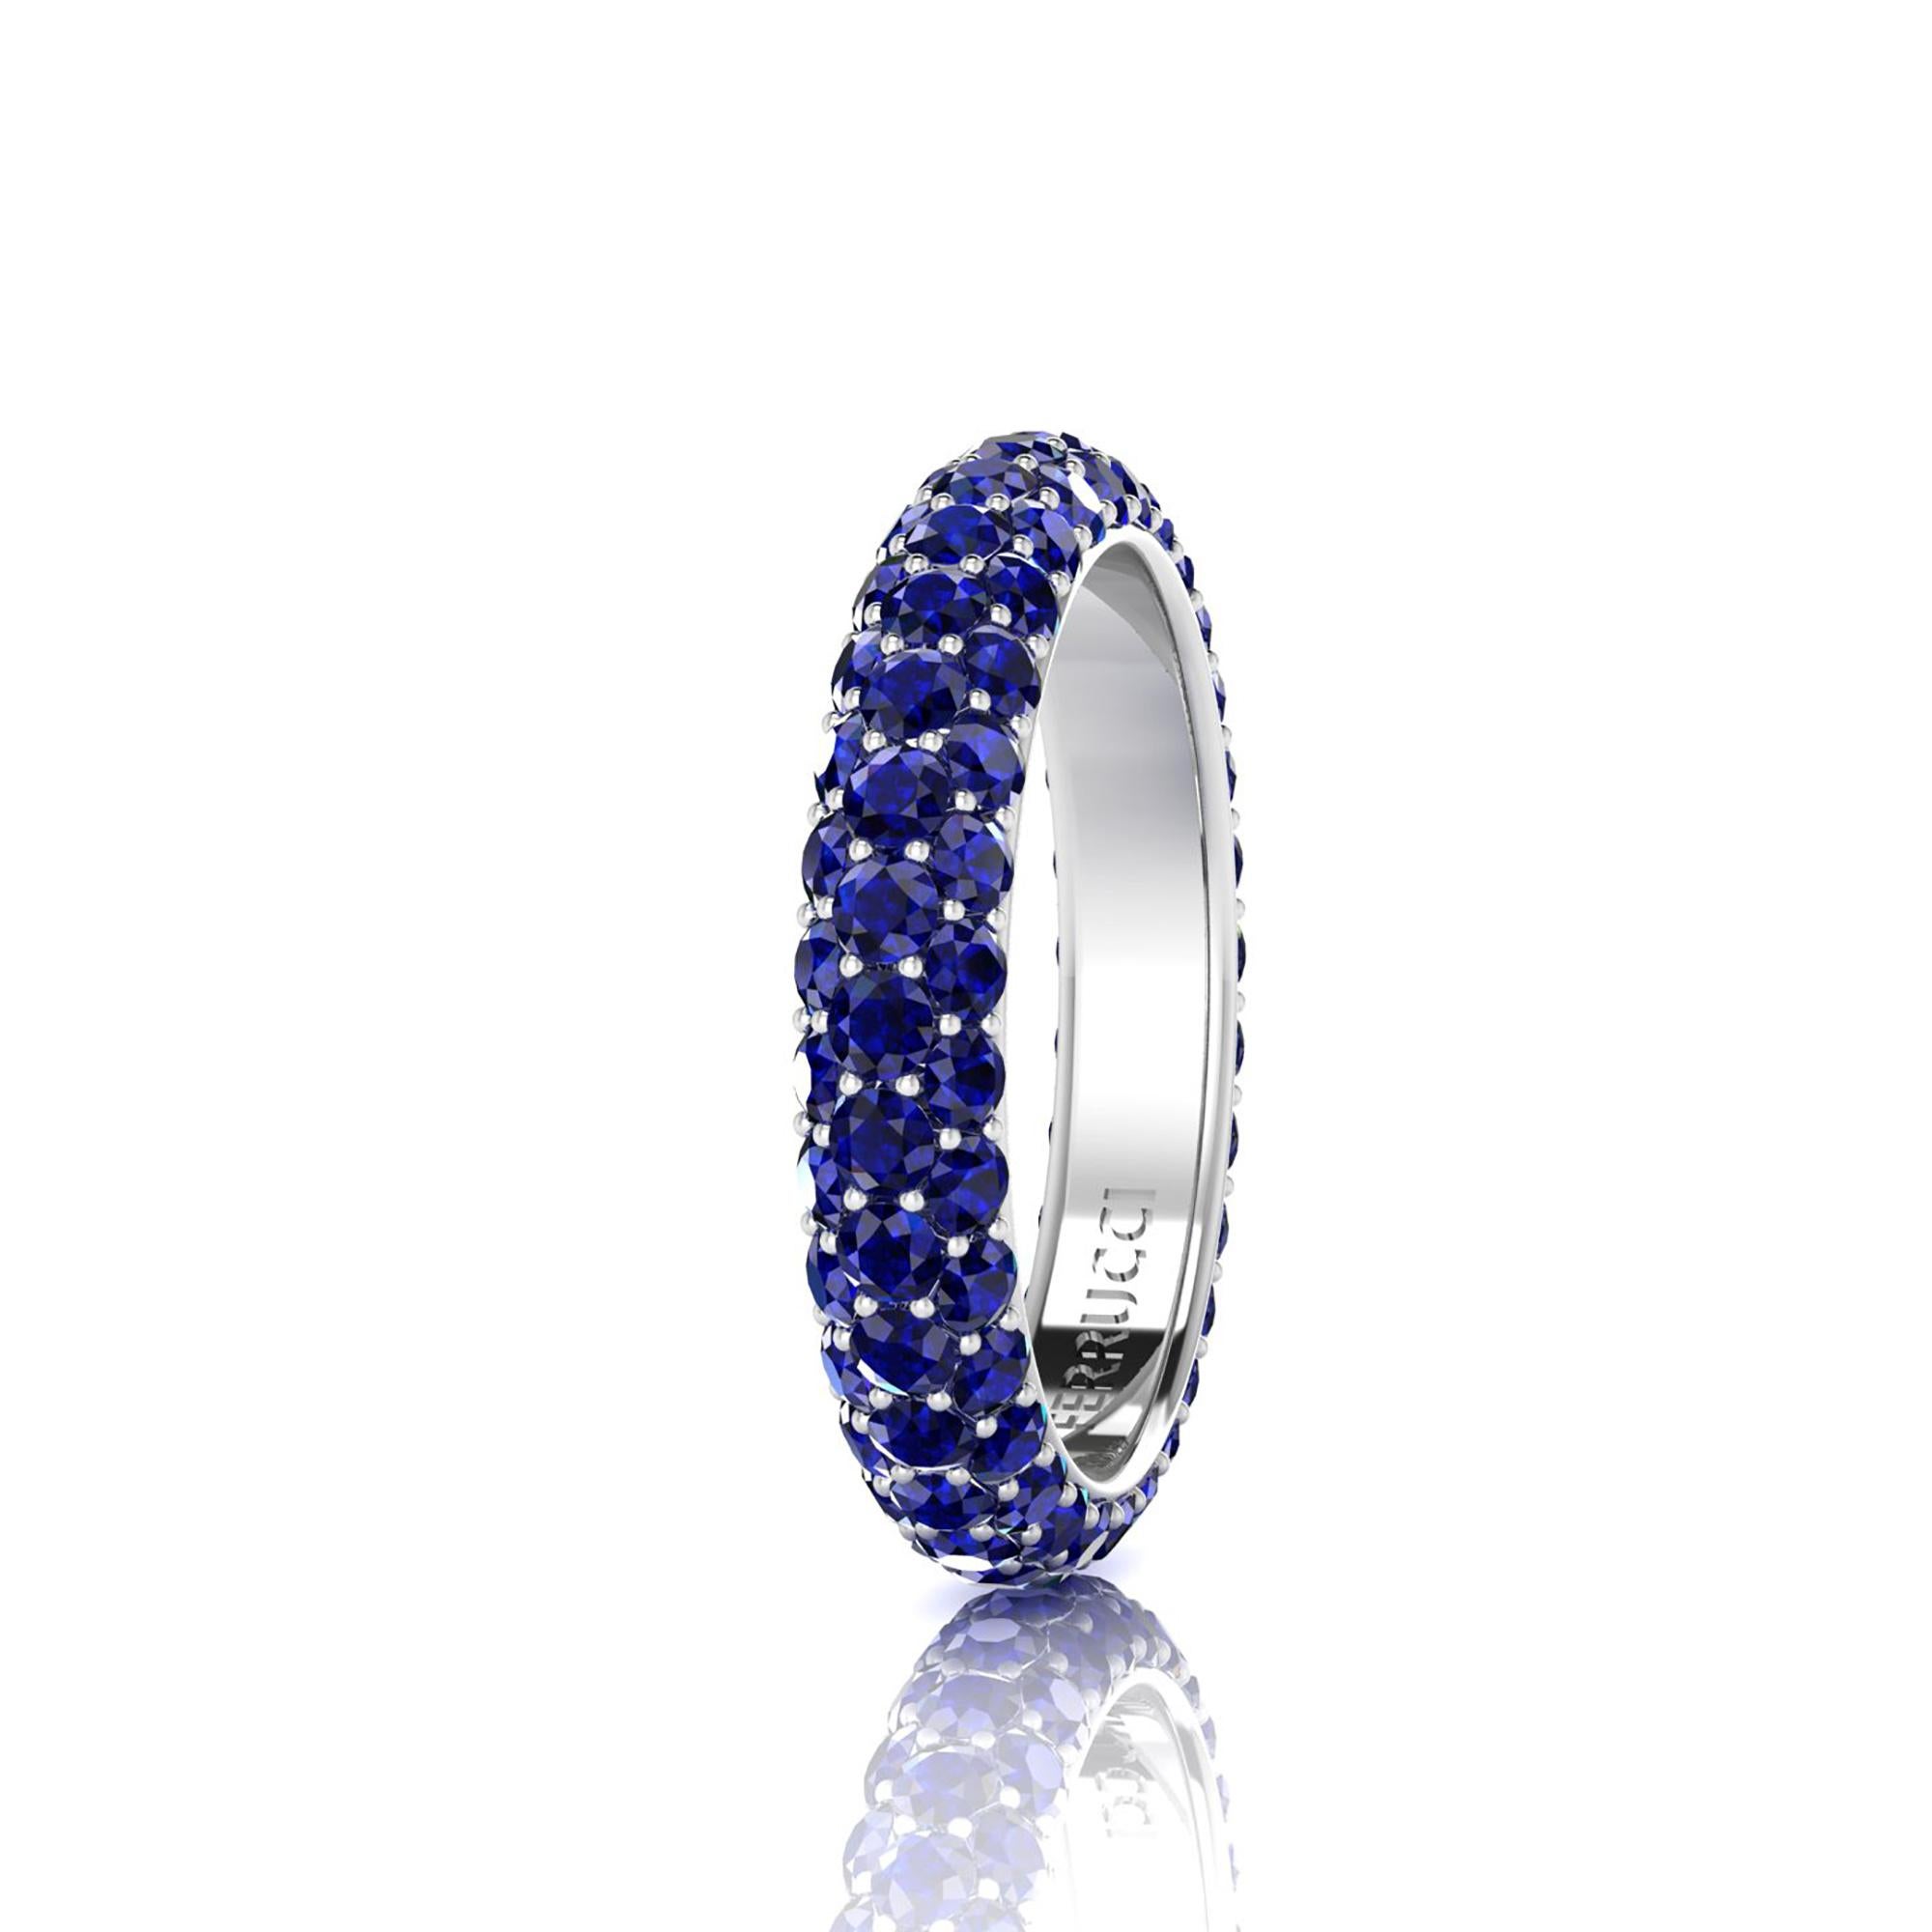 FERRUCCI blue sapphires eternity ring, for an approximate total carat weight of 2.00 carat, hand made in New York City with the best Italian craftsmanship, conceived in 18k white gold.
Classic, sophisticated, gorgeous, everlasting look, for a